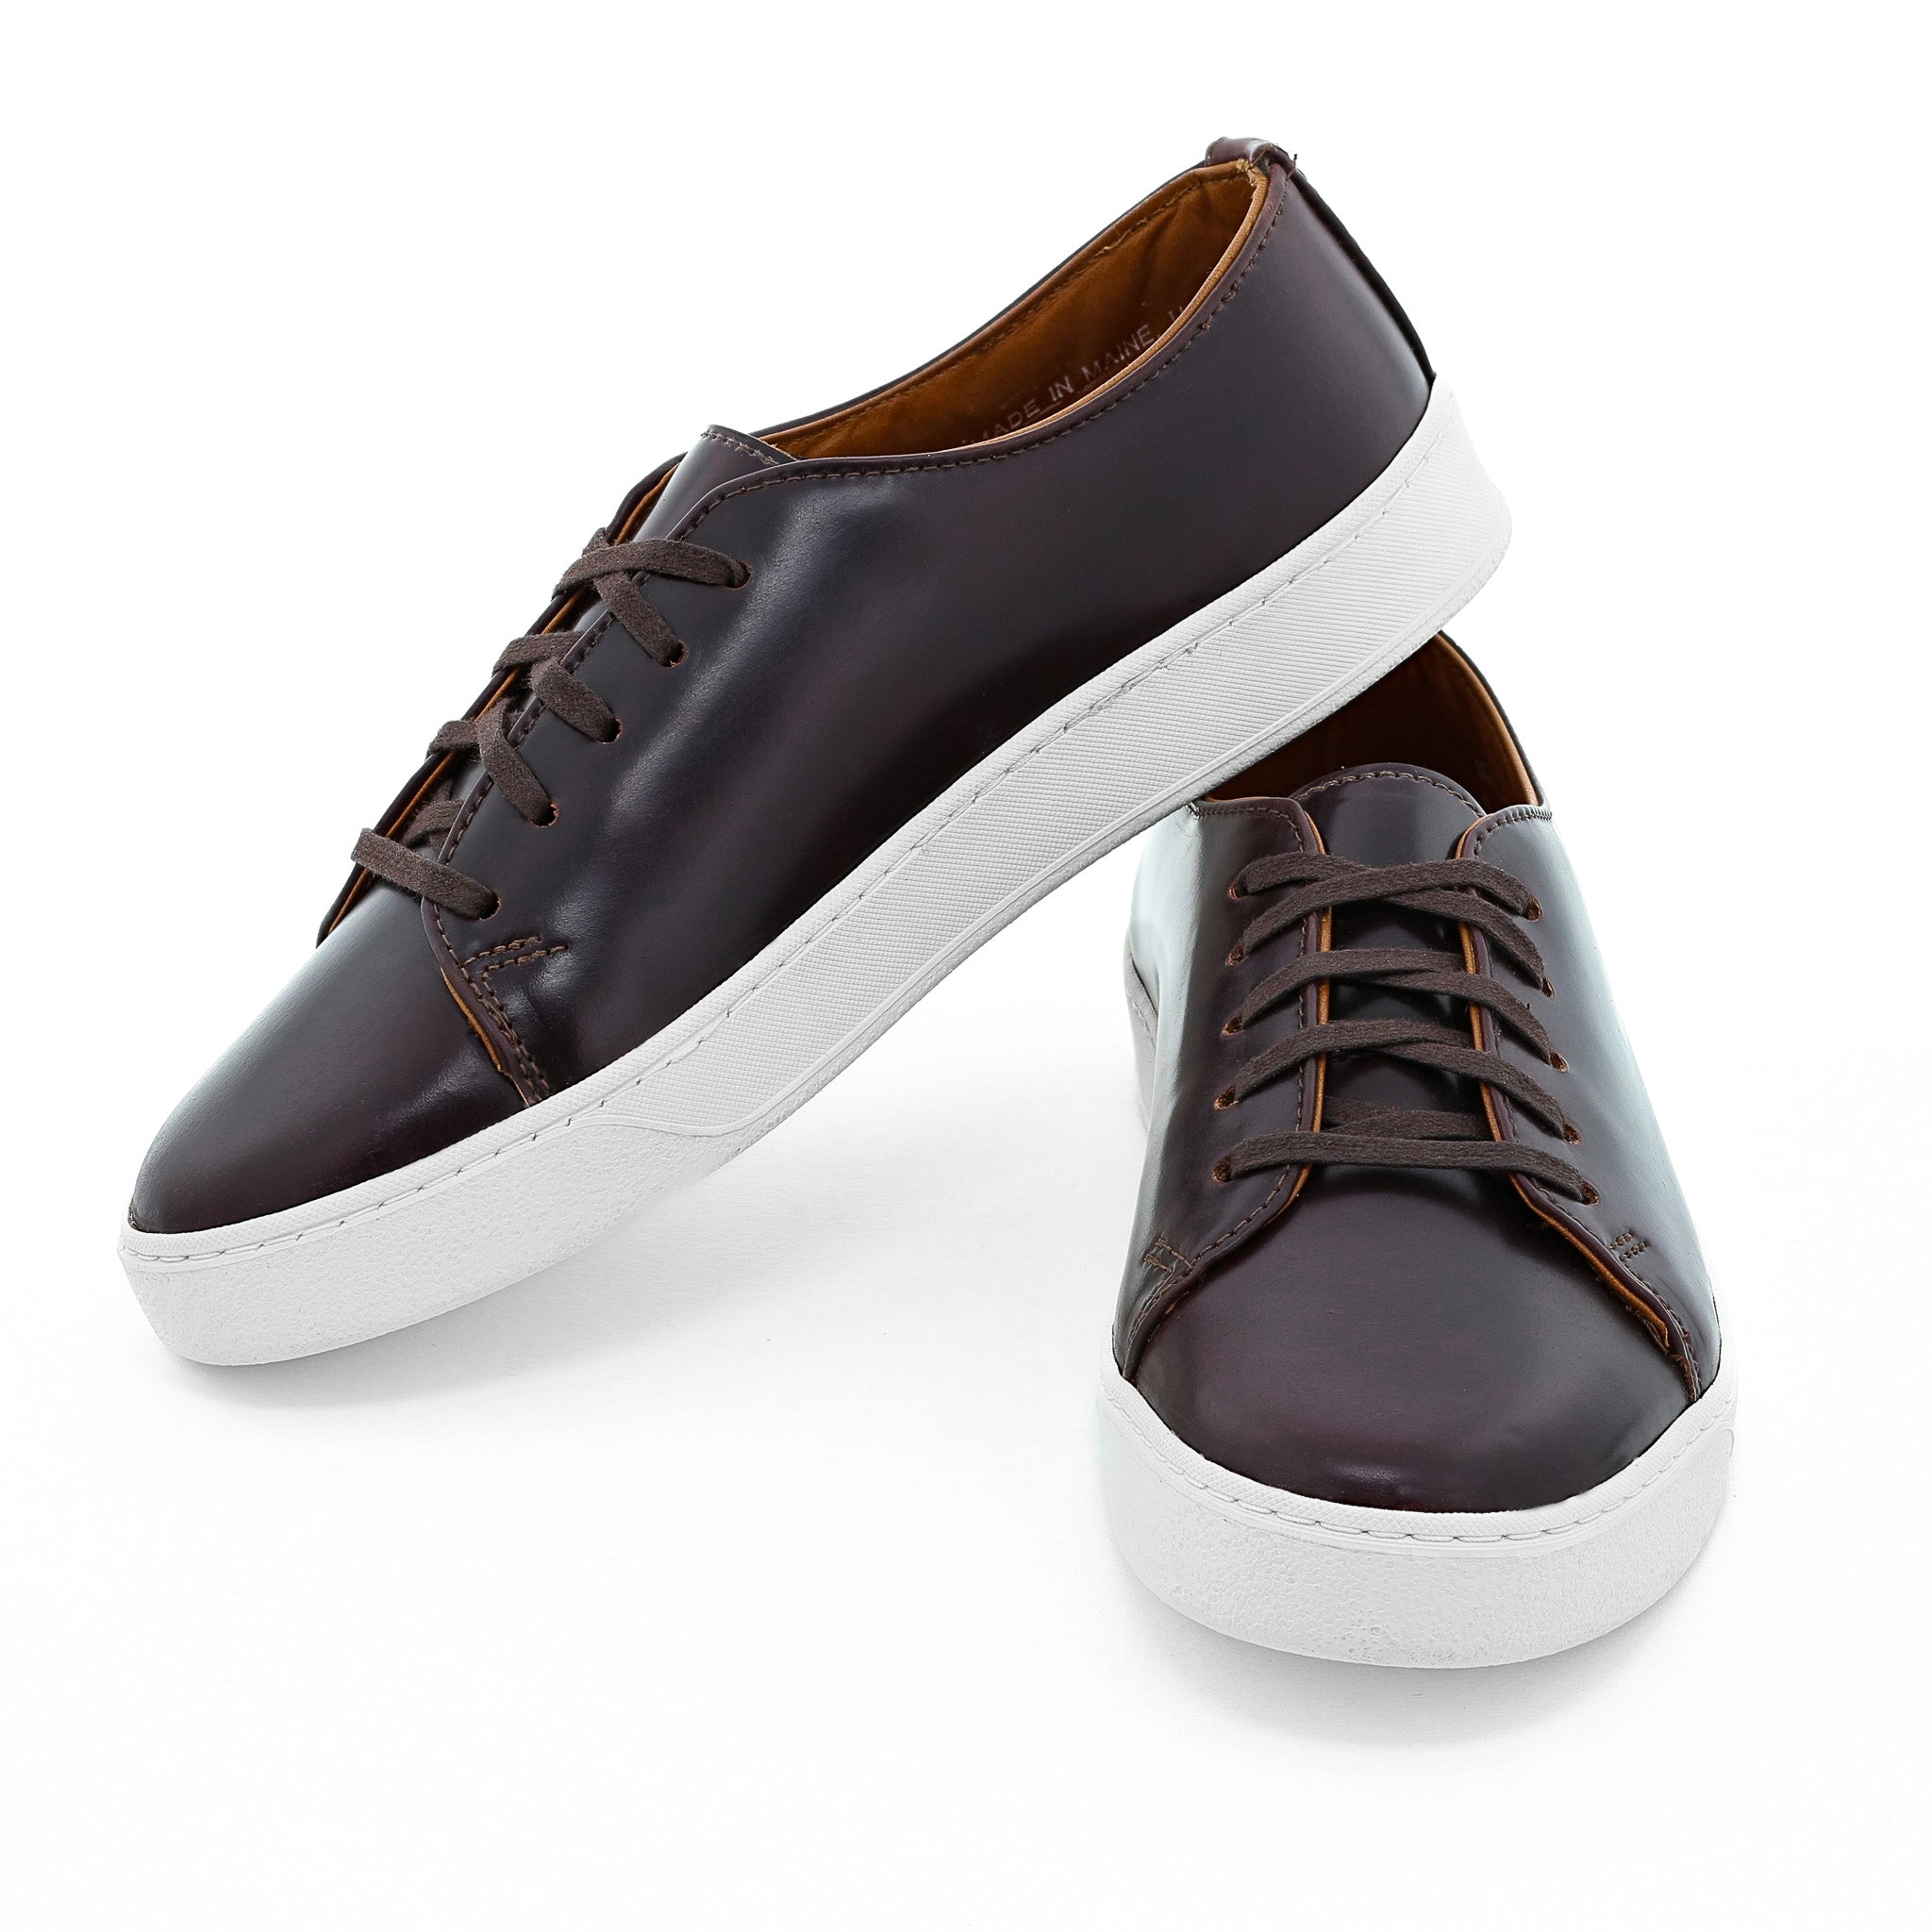 Cup Sole 30 Sneakers - The Revury